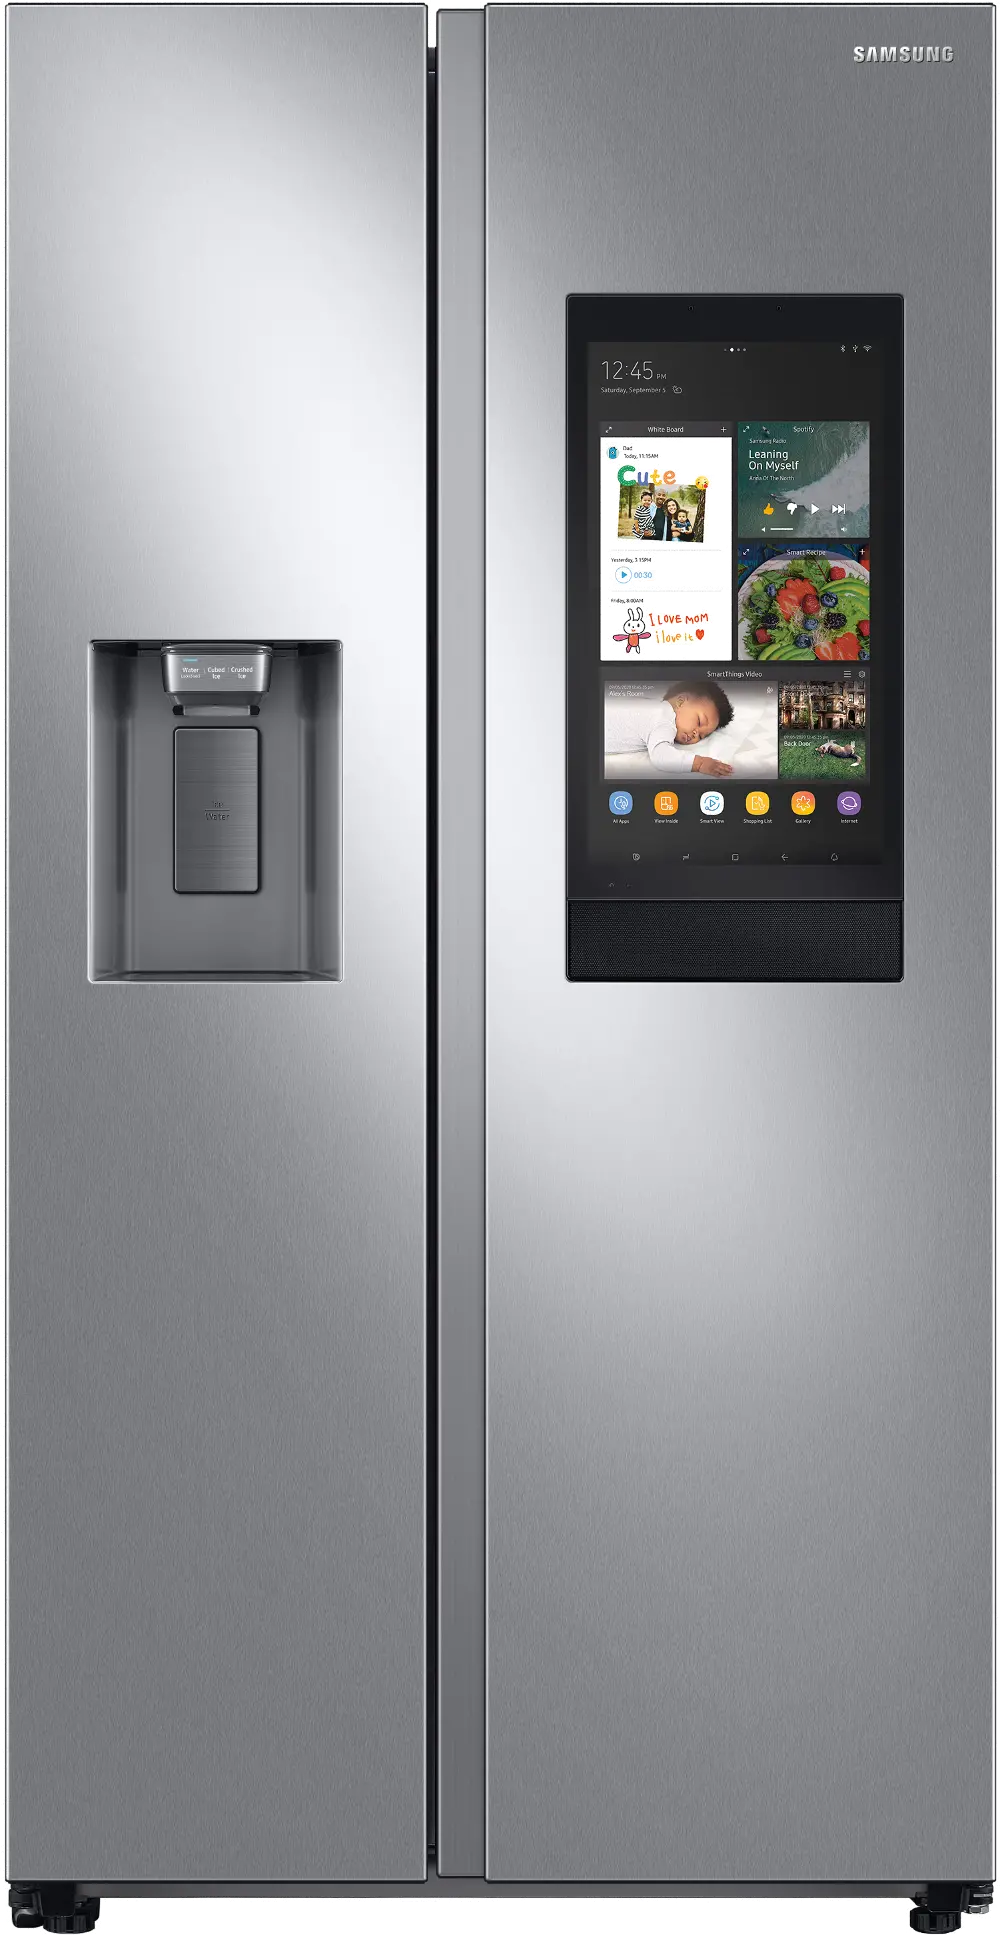 RS27T5561SR Samsung 26.7 cu ft Side by Side Refrigerator - Stainless Steel-1